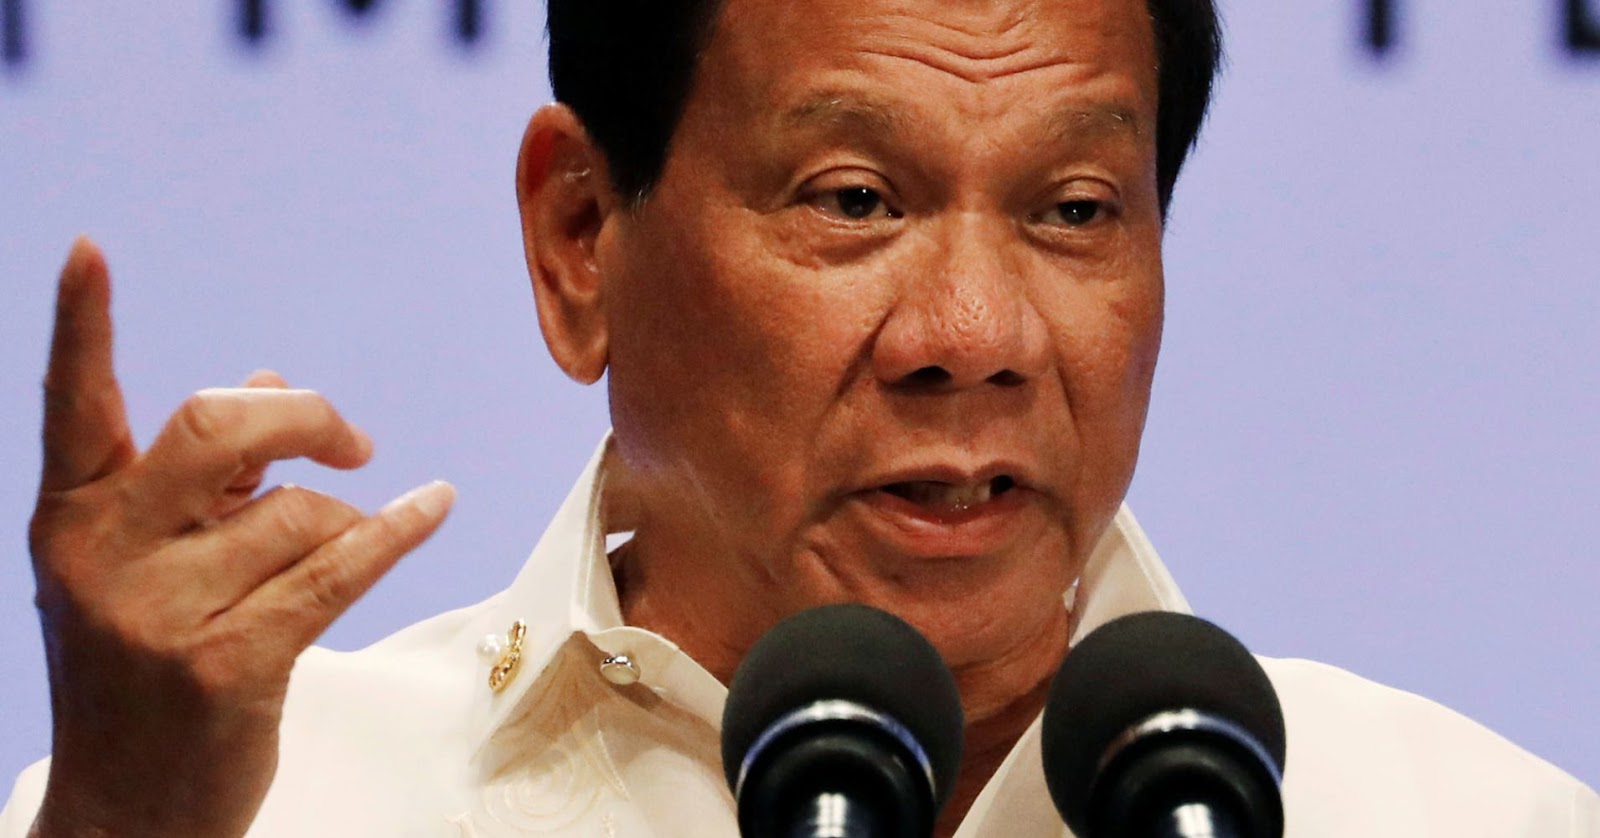 The Philippines Per Capita GDP Has Reached An All-Time High Under Duterte